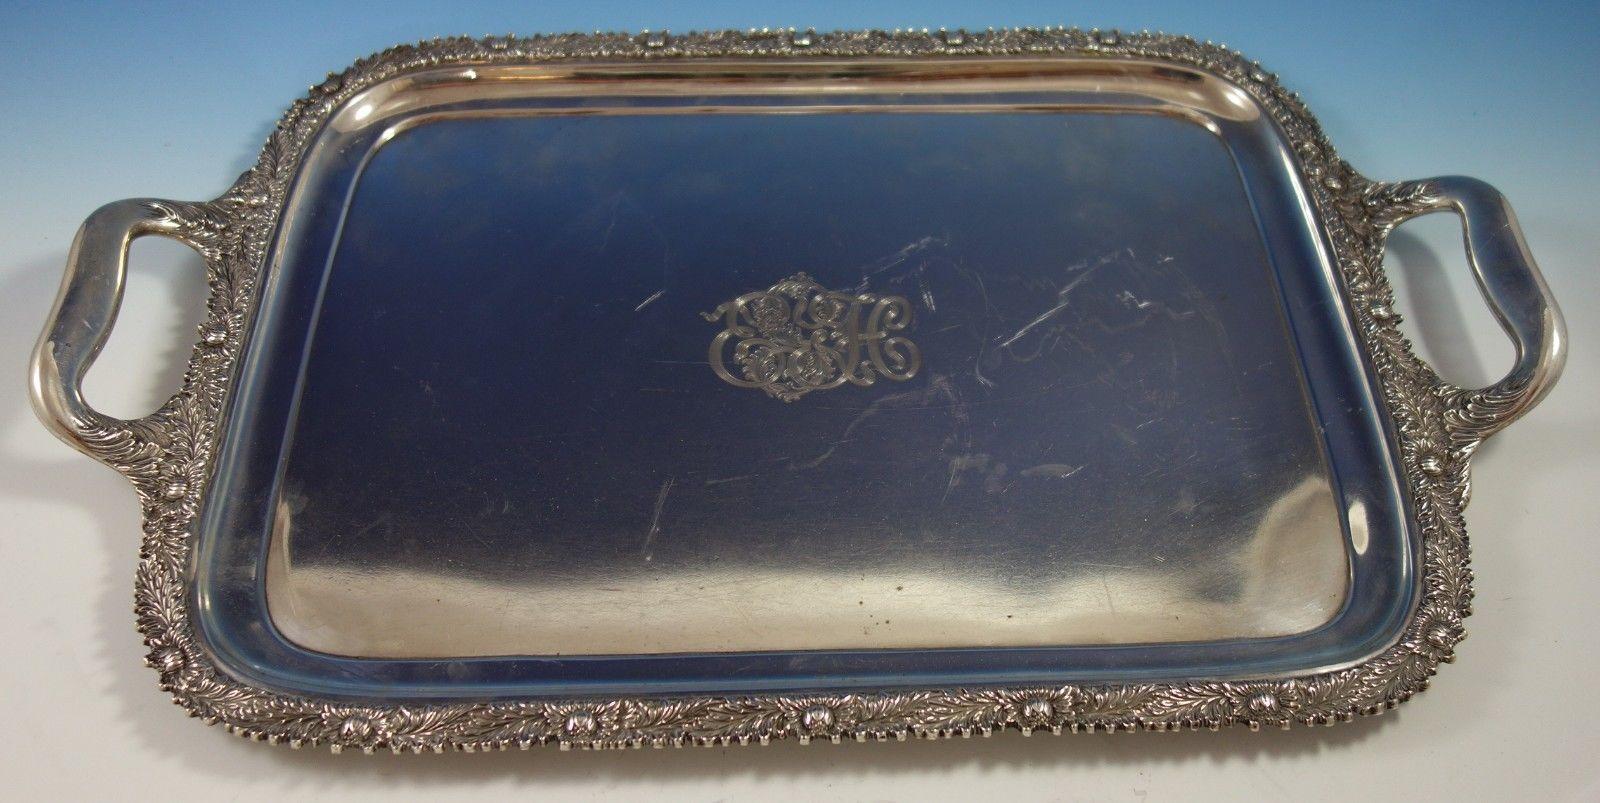 Superb Chrysanthemum by Tiffany & Co. sterling silver large and impressive antique tea tray with handles. The tray is marked #6682-4278 with 